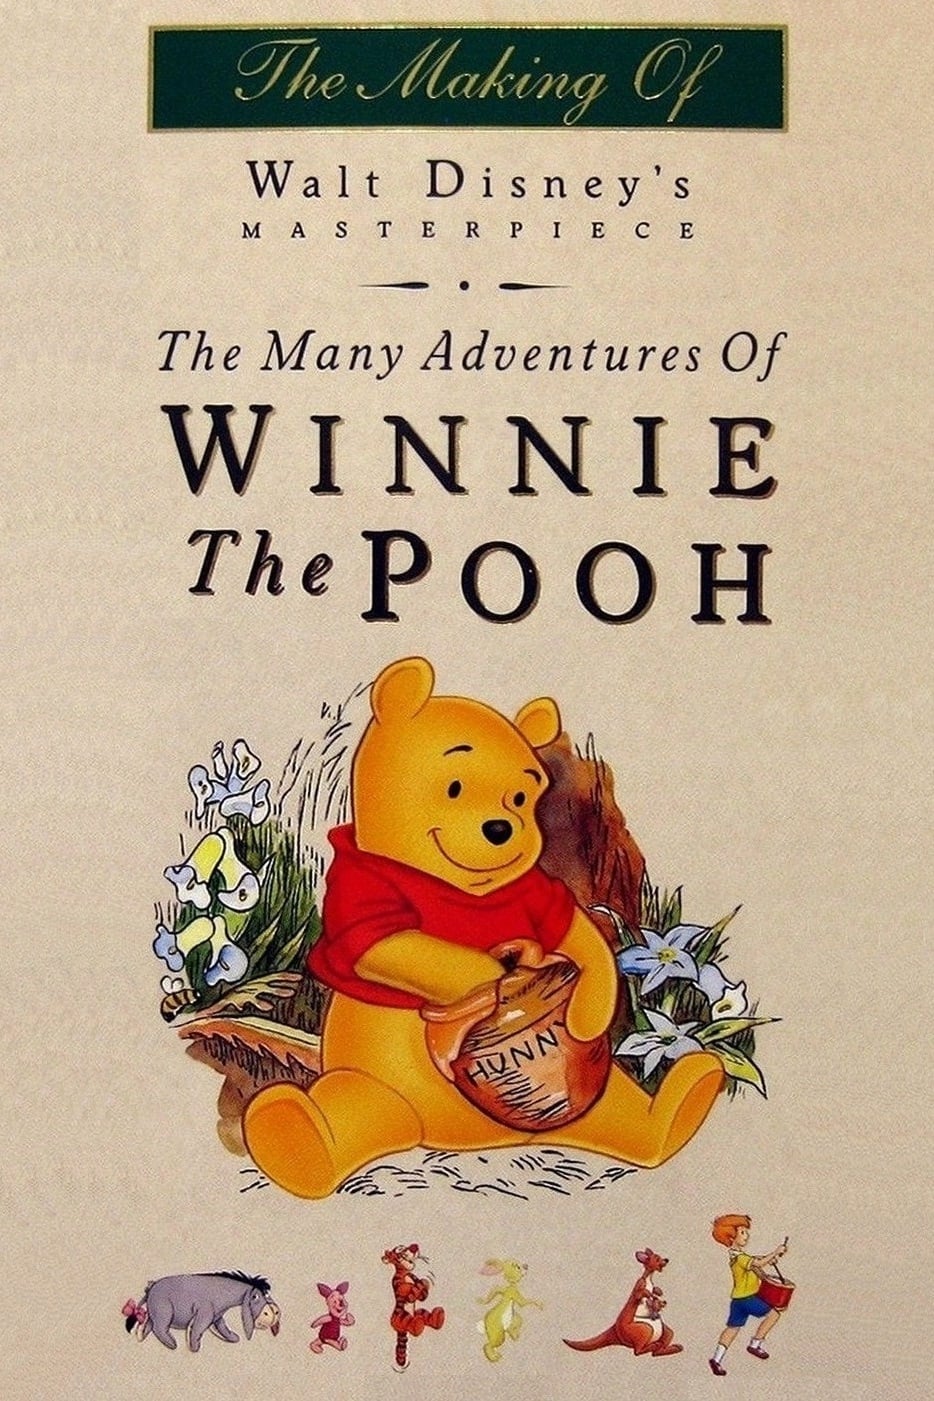 The Many Adventures of Winnie the Pooh: The Story Behind the Masterpiece (2002)